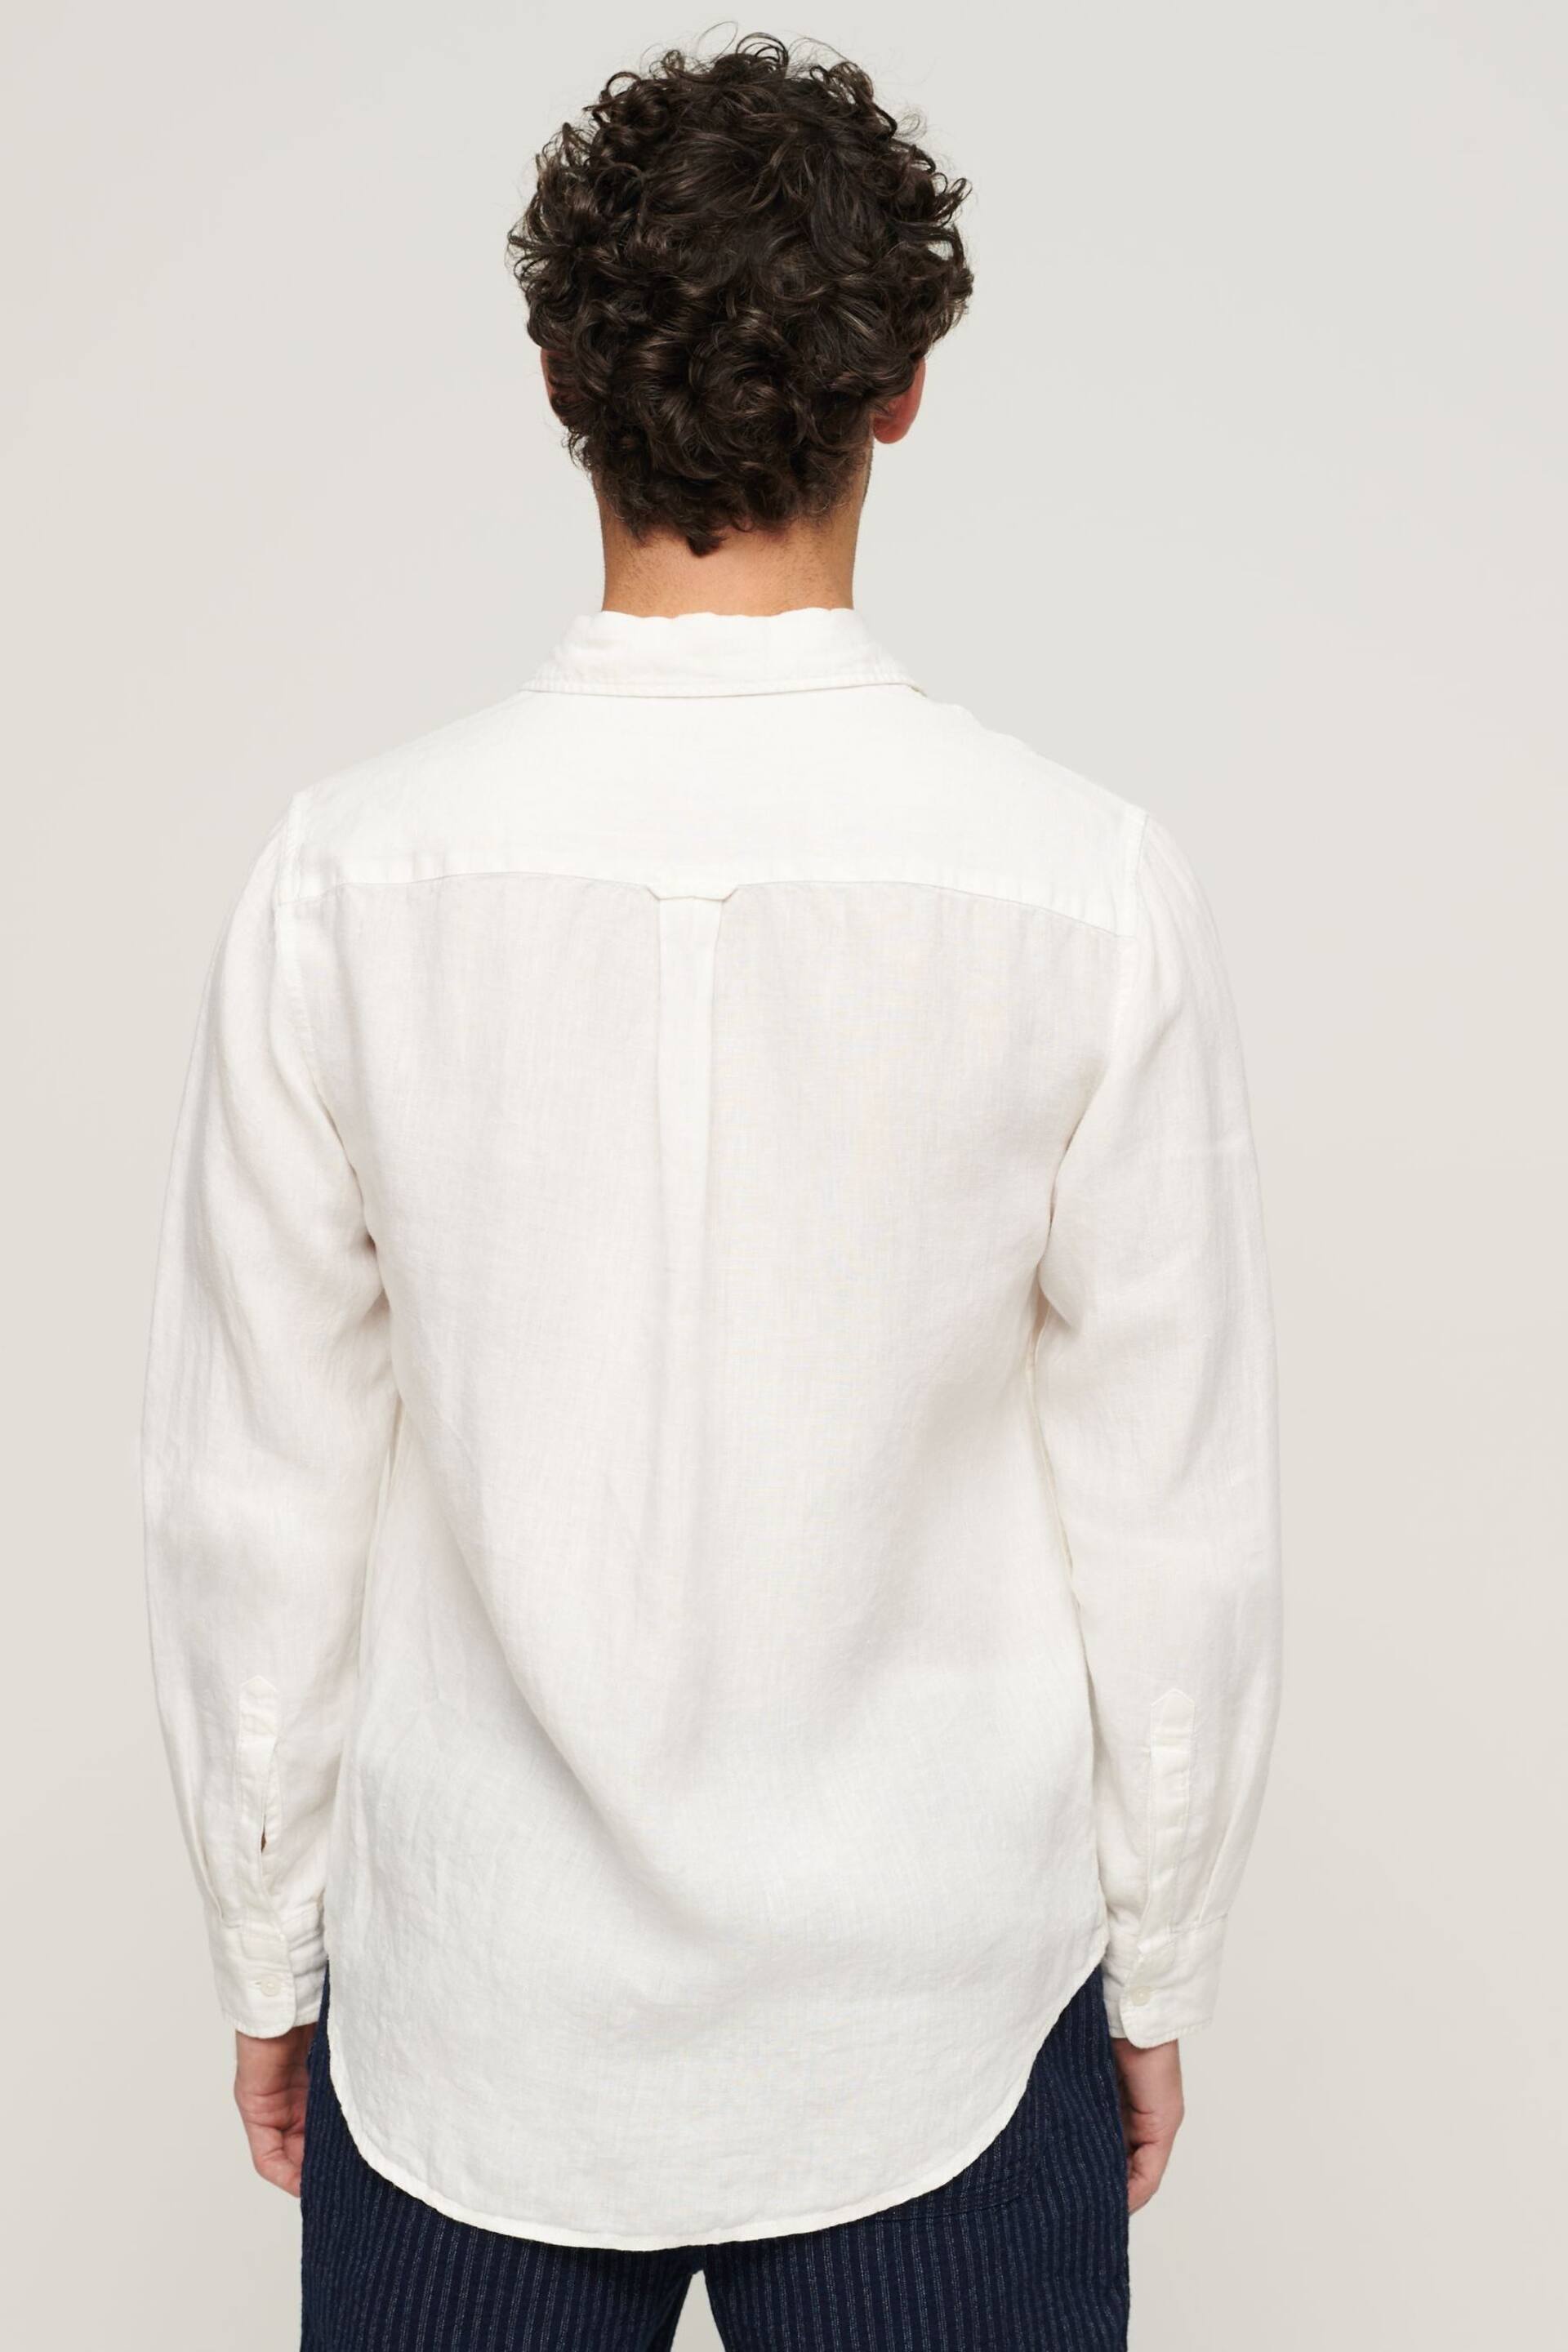 Superdry Optic Studios Casual Linen Long Sleeved Shirt - Image 2 of 7